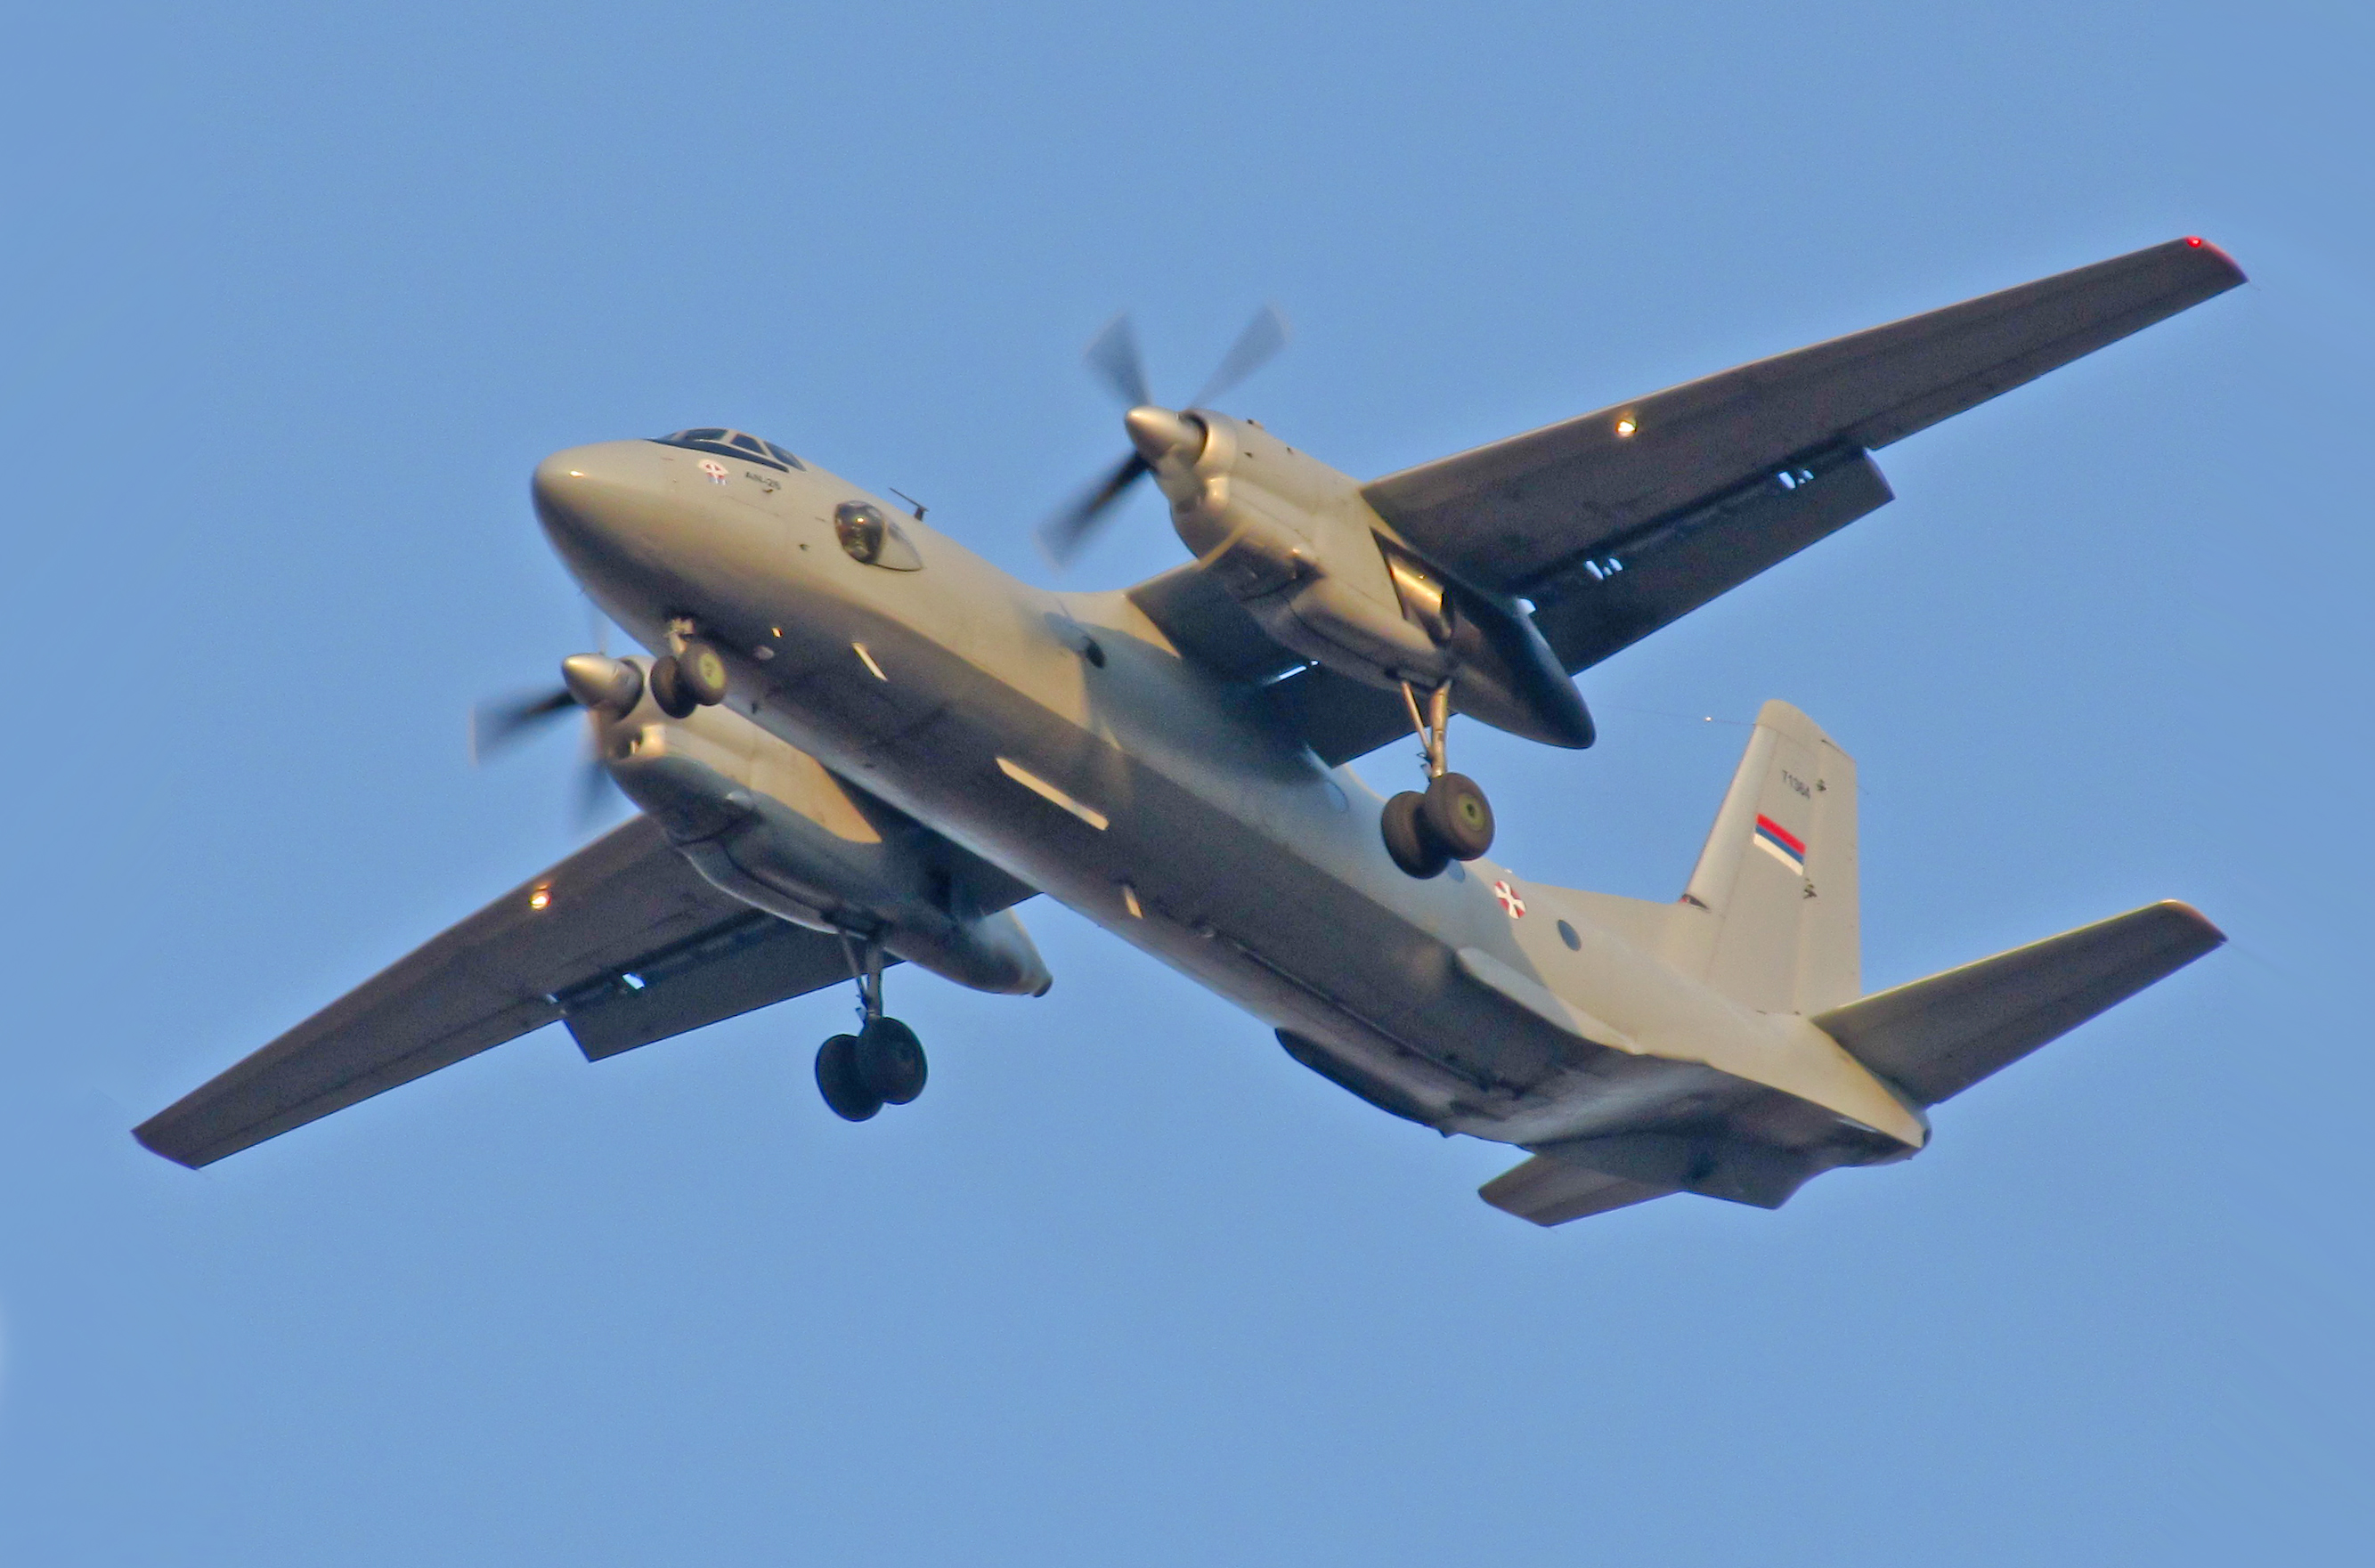 Russian A-26 Avoided Collision With Two U.S. Combat Drones Over Syria